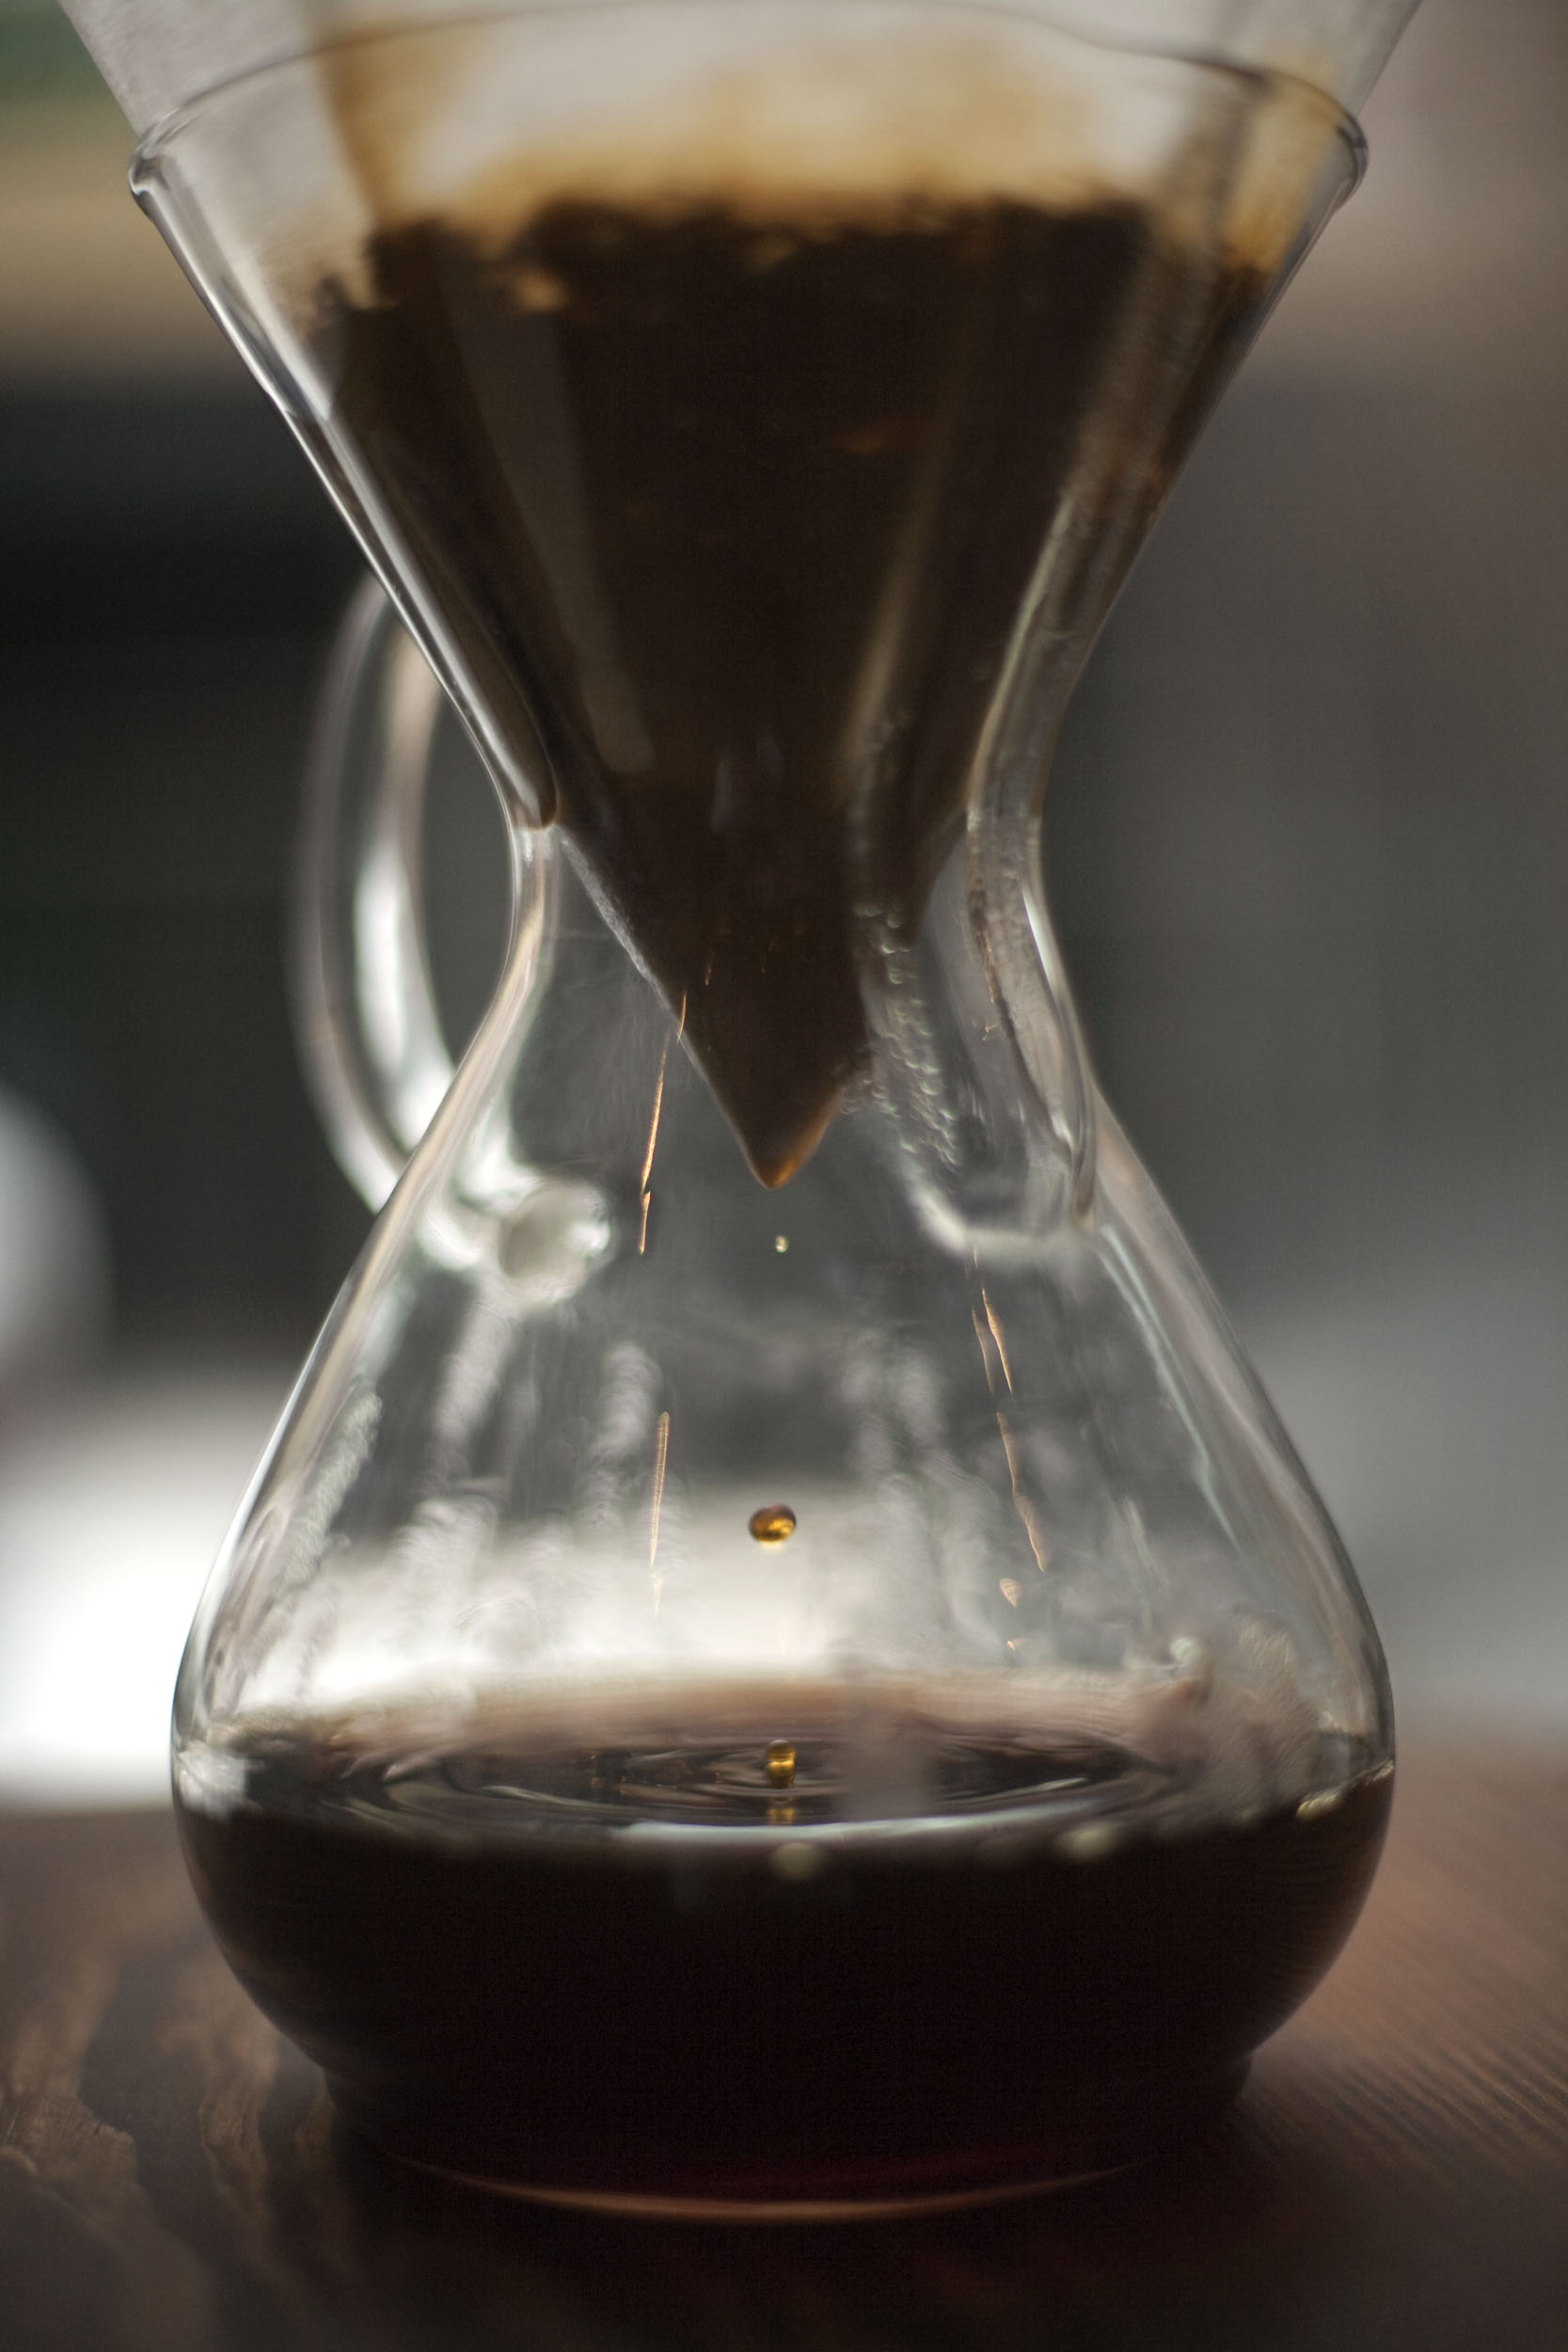 Chemex Pour-Over Glass Coffeemaker - Glass Handle